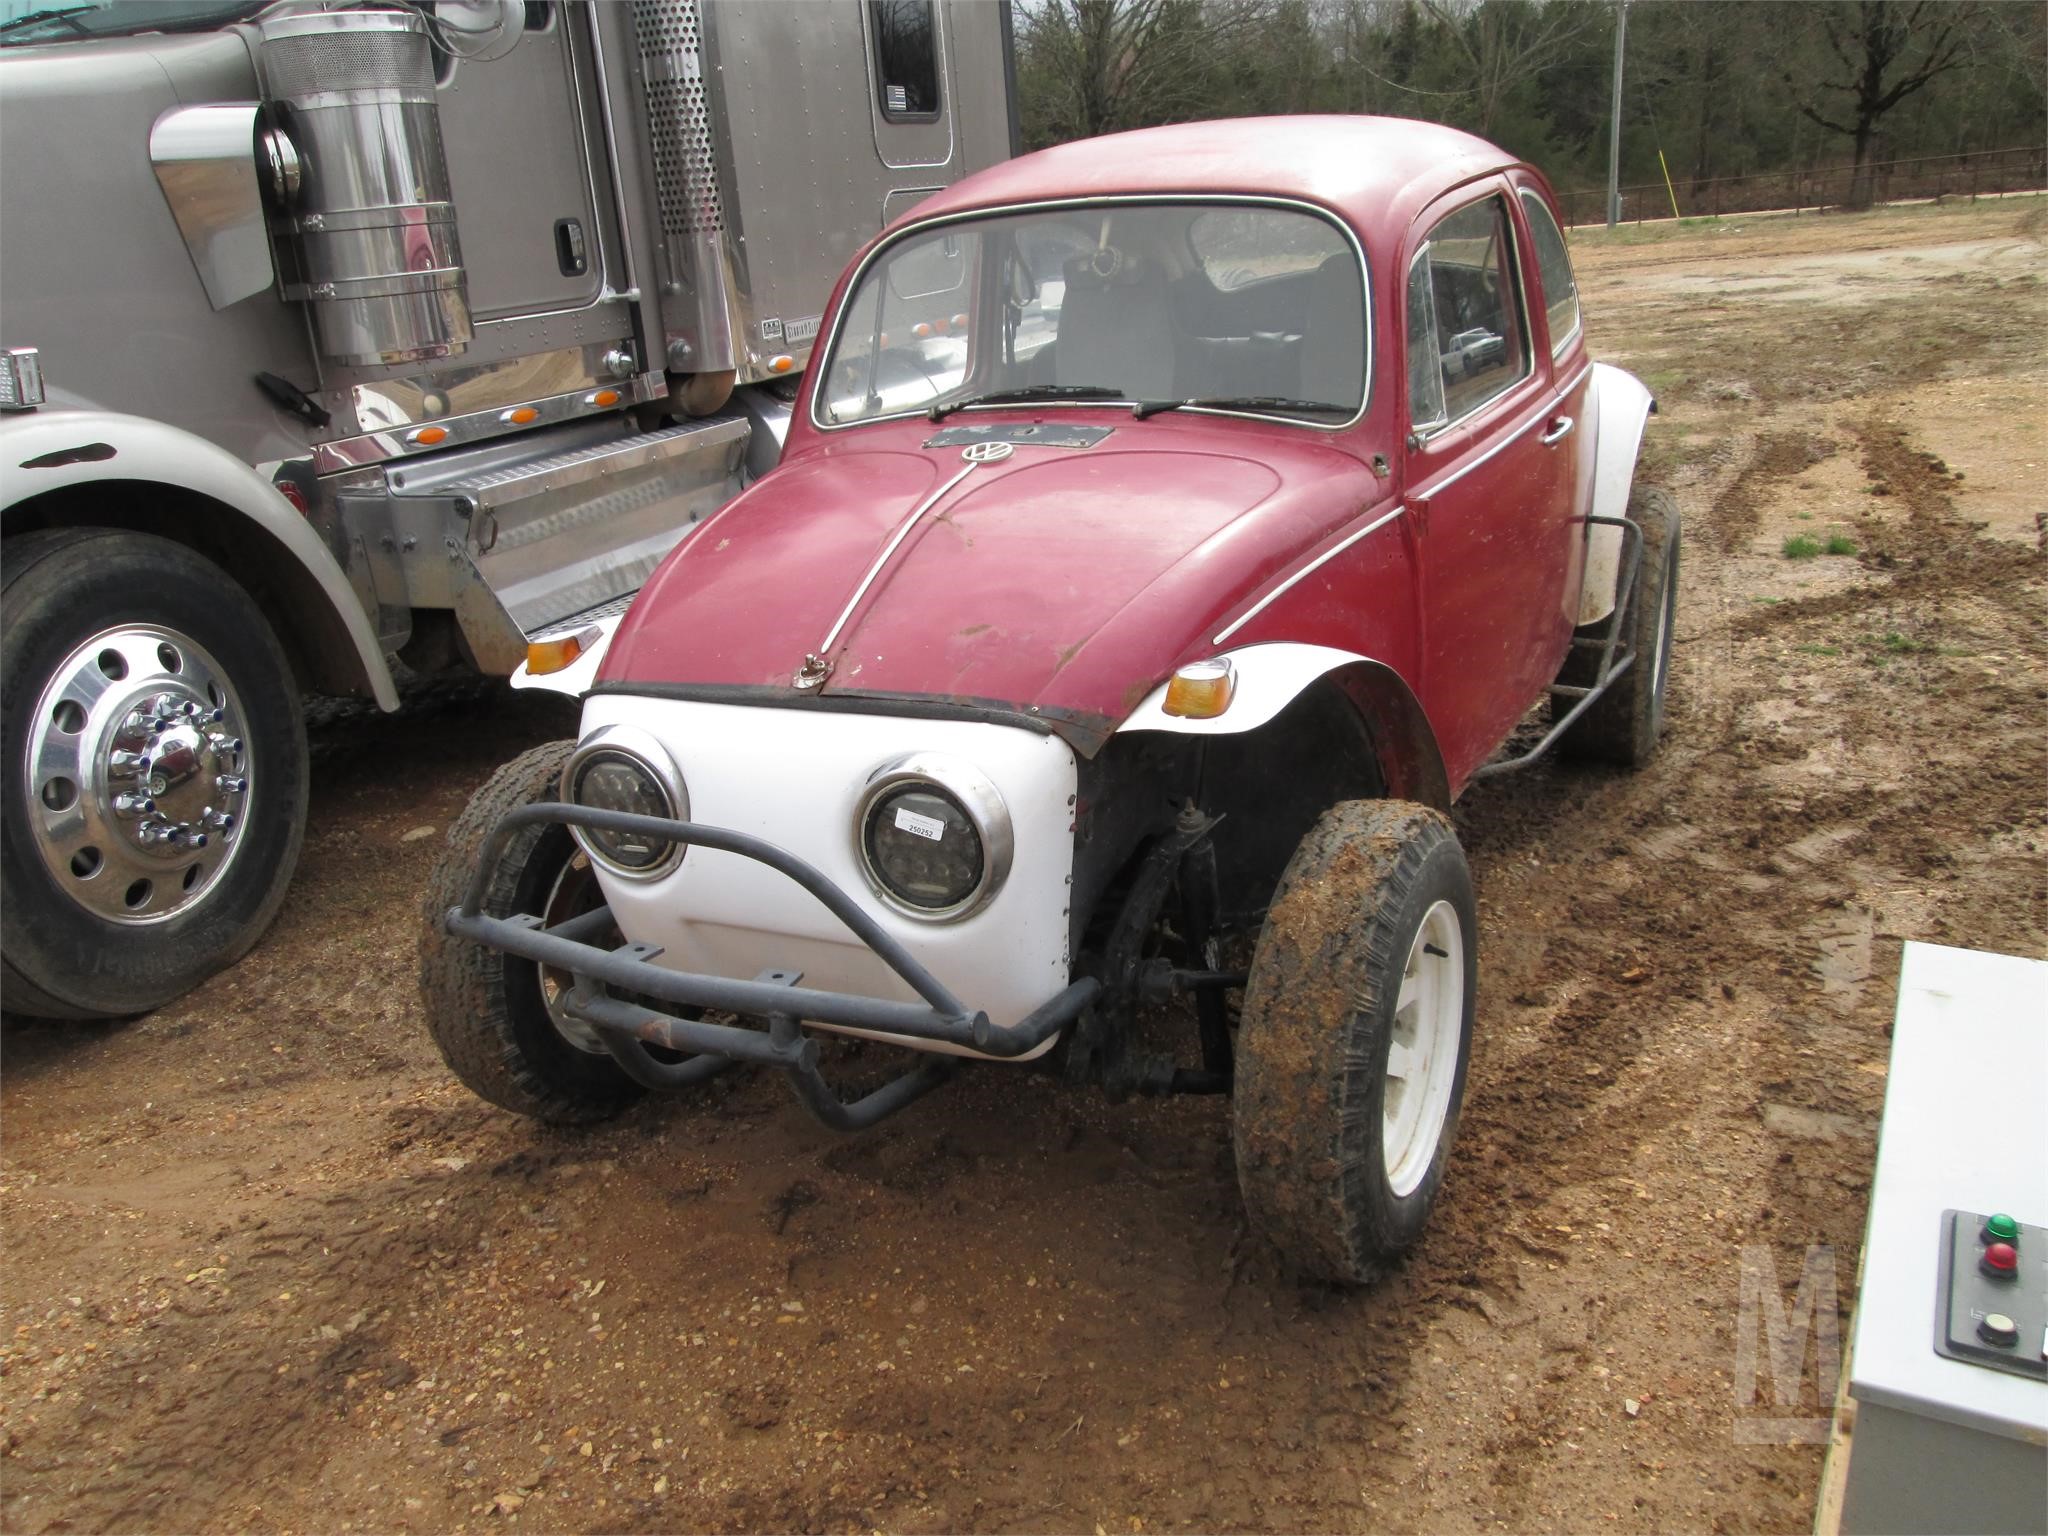 VOLKSWAGEN Other Auction Results - 34 Listings